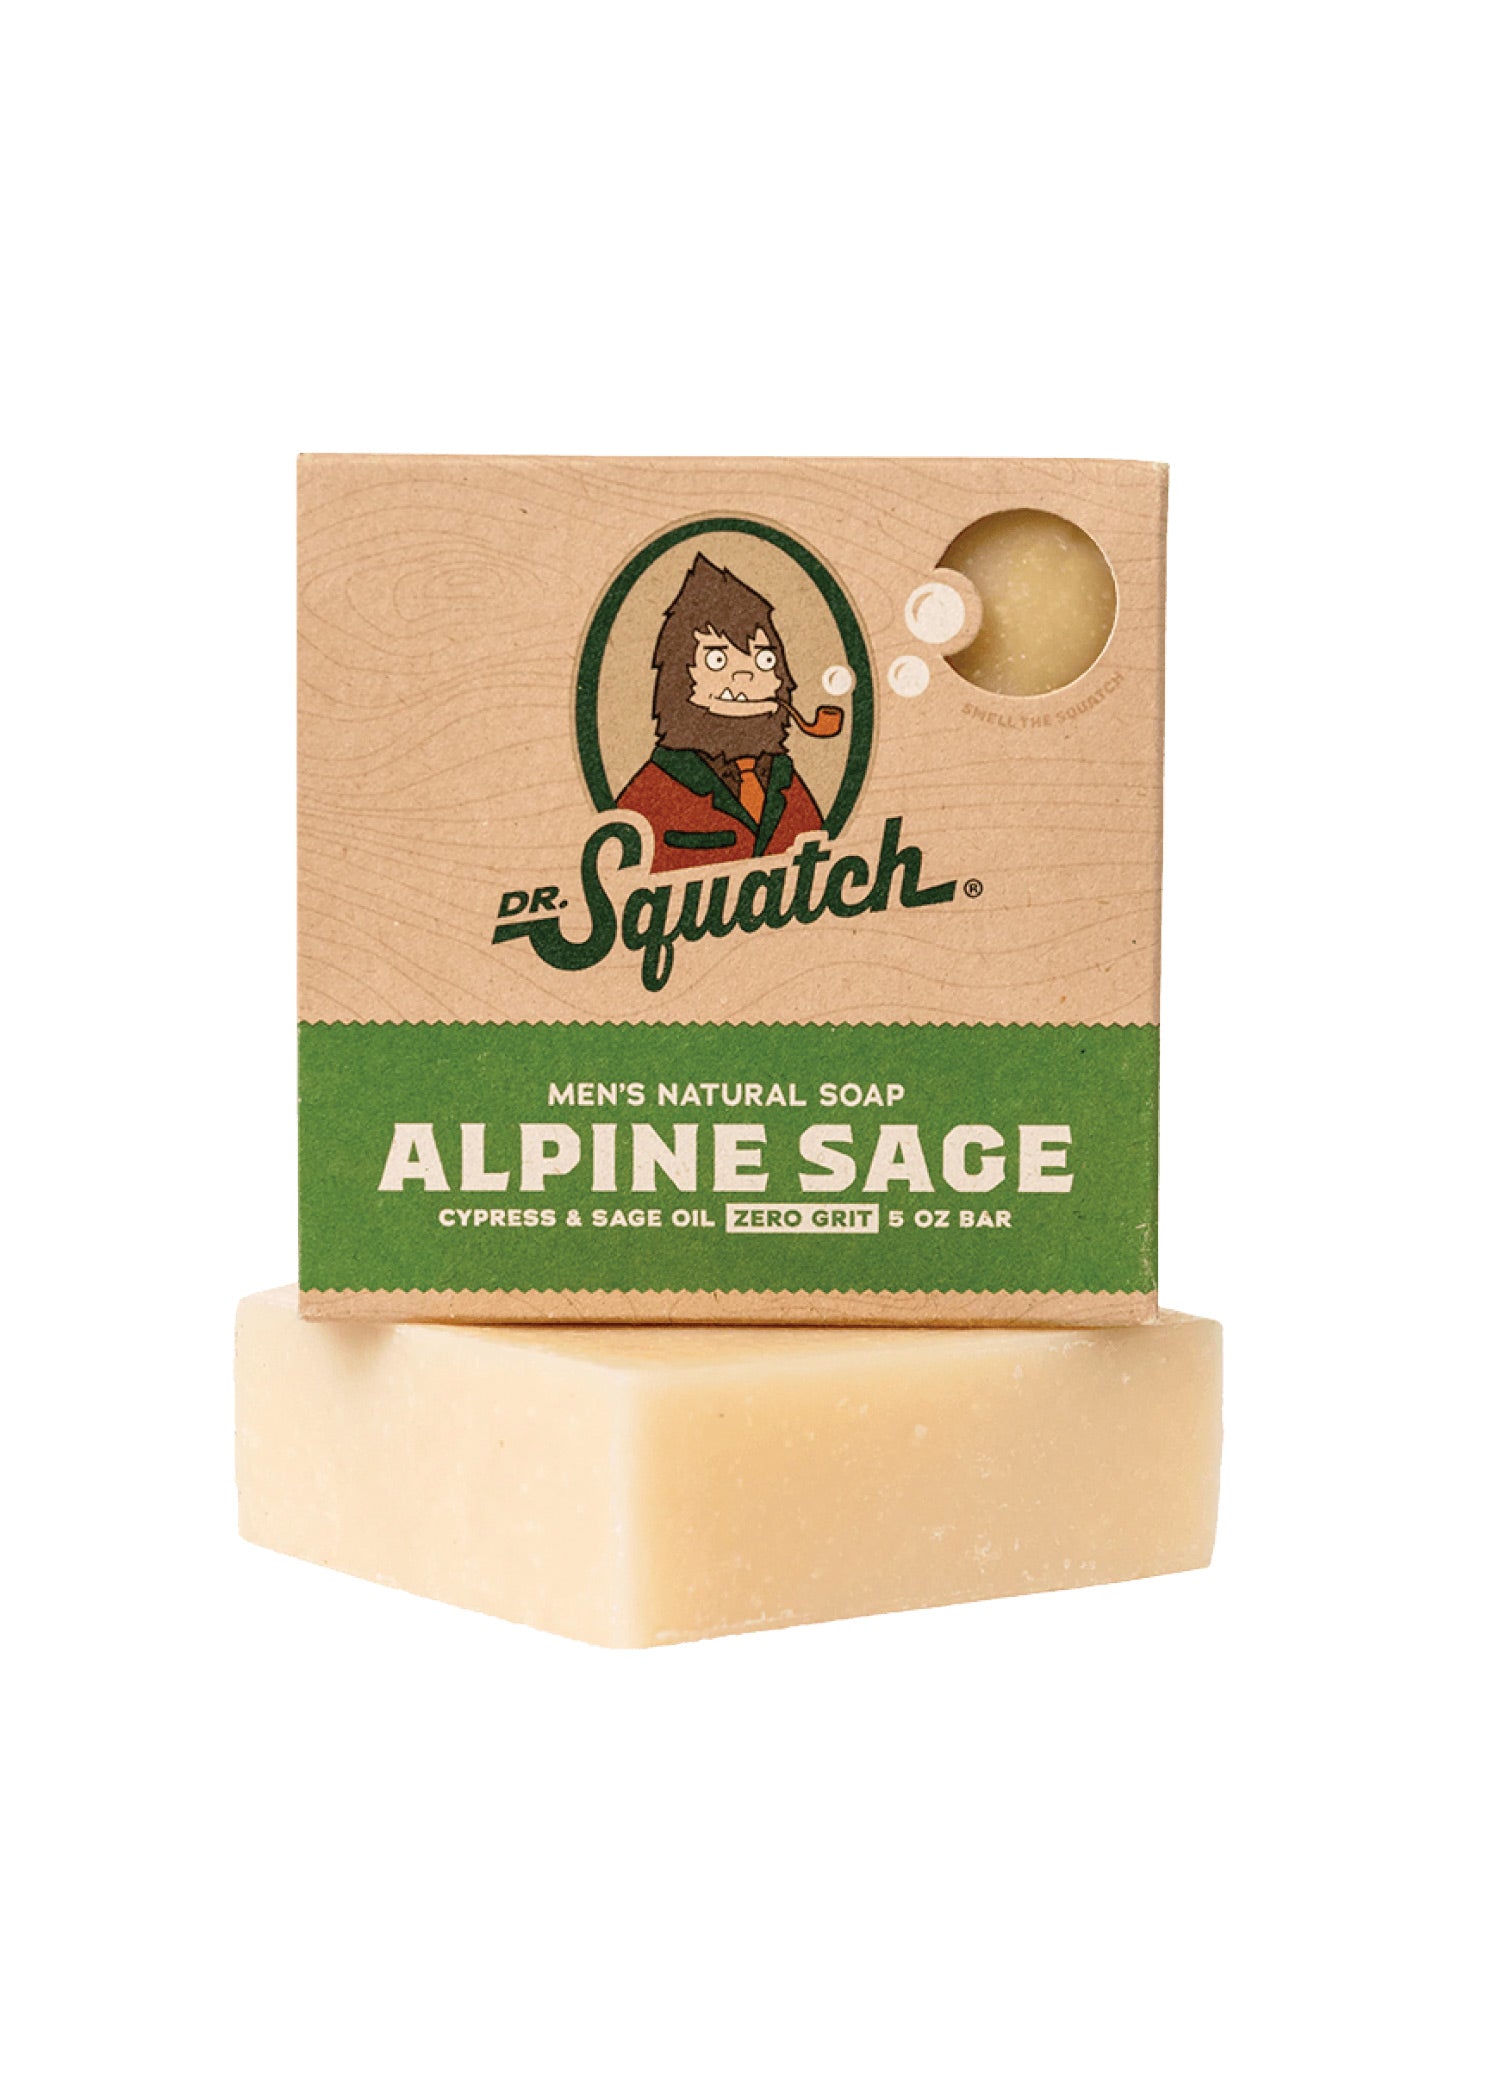 Dr.Squatch Alpine Sage Review and MORE!! 